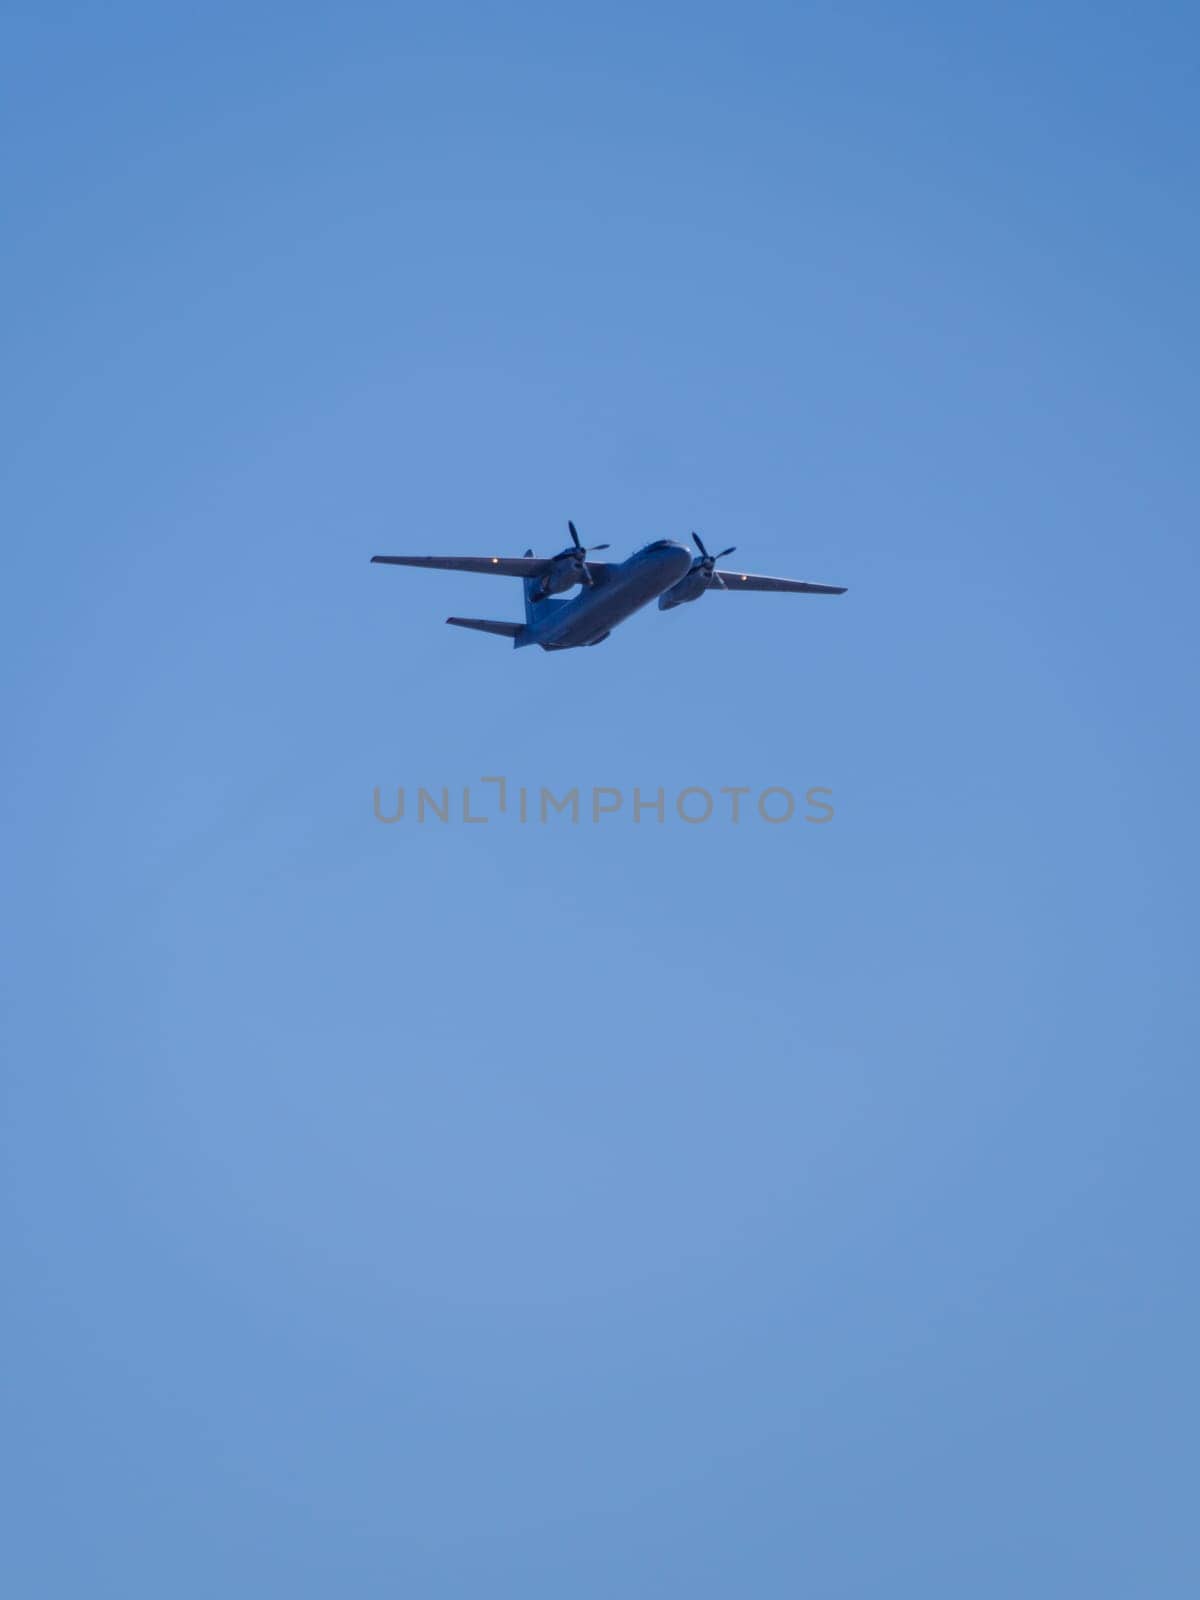 Russia, St. Petersburg - June 24, 2020: Russian military an-26 plane of the Russian Air Force in flight at the Victory Parade in World War II. by Andre1ns